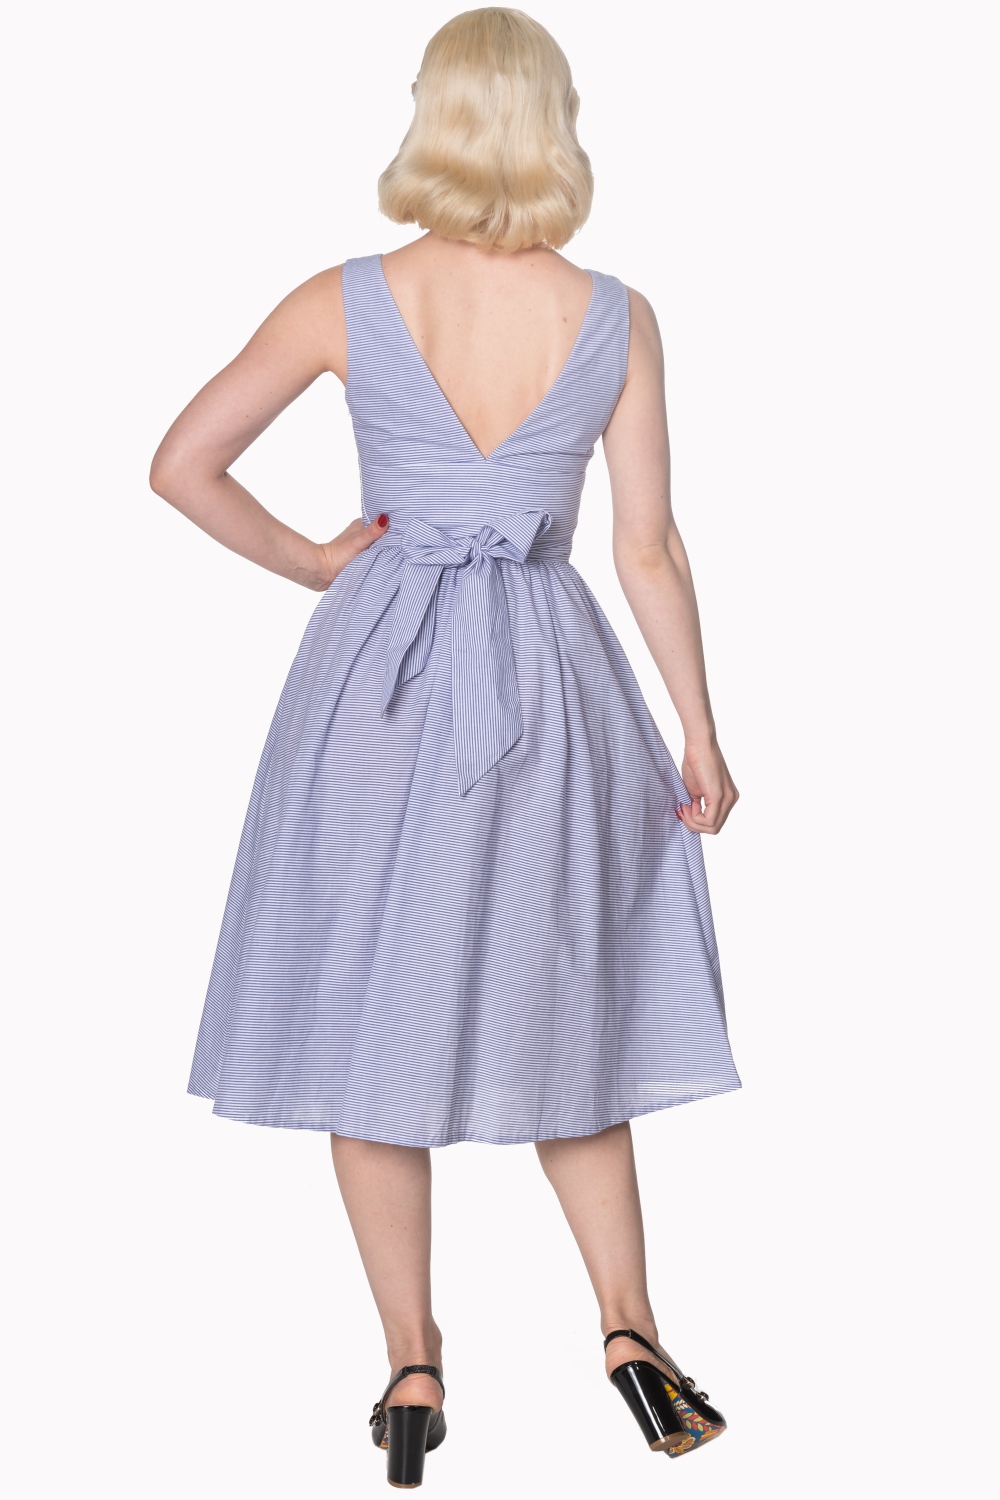 Dancing Days 50s Striped Blue And White Swing Dress